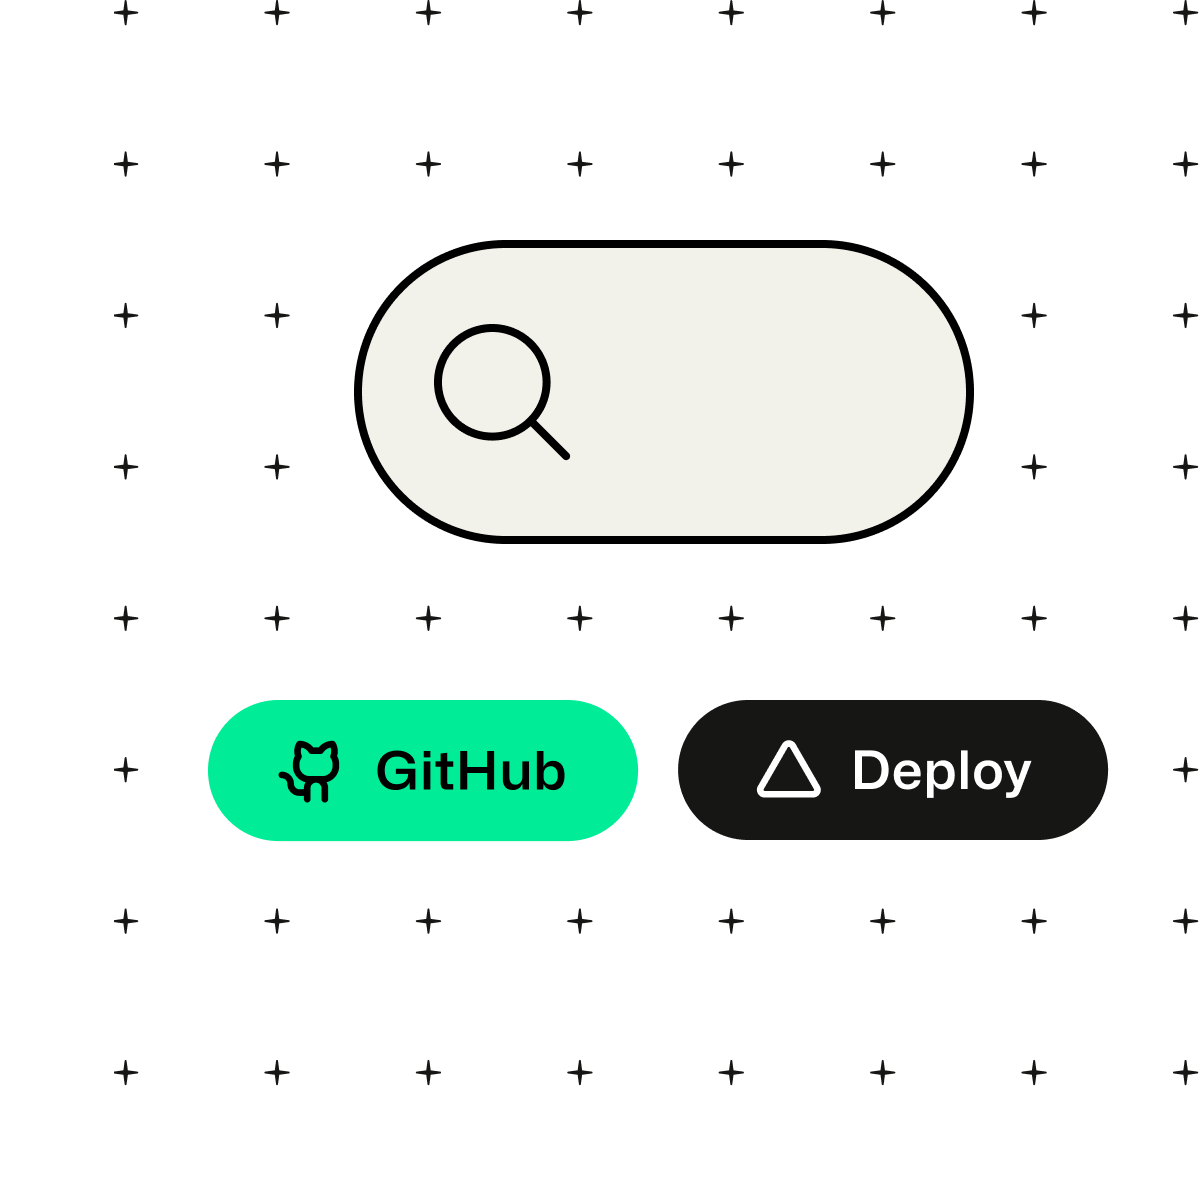 Illustration of a search bar above two buttons for GitHub and Deploy